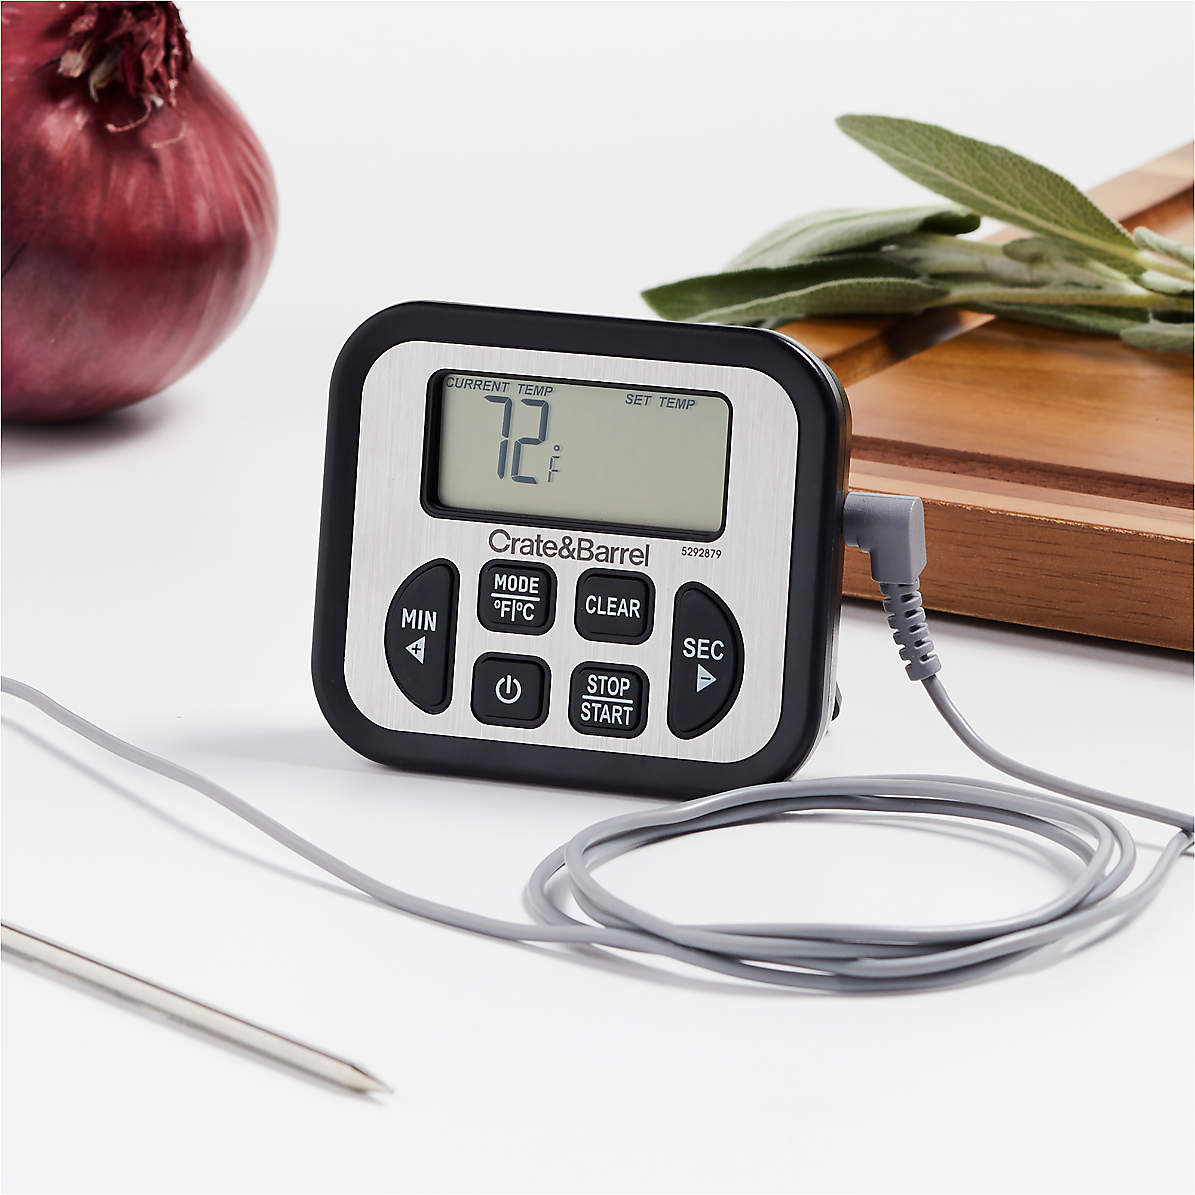 Crate & Barrel by Taylor Oven Thermometer + Reviews, Crate & Barrel